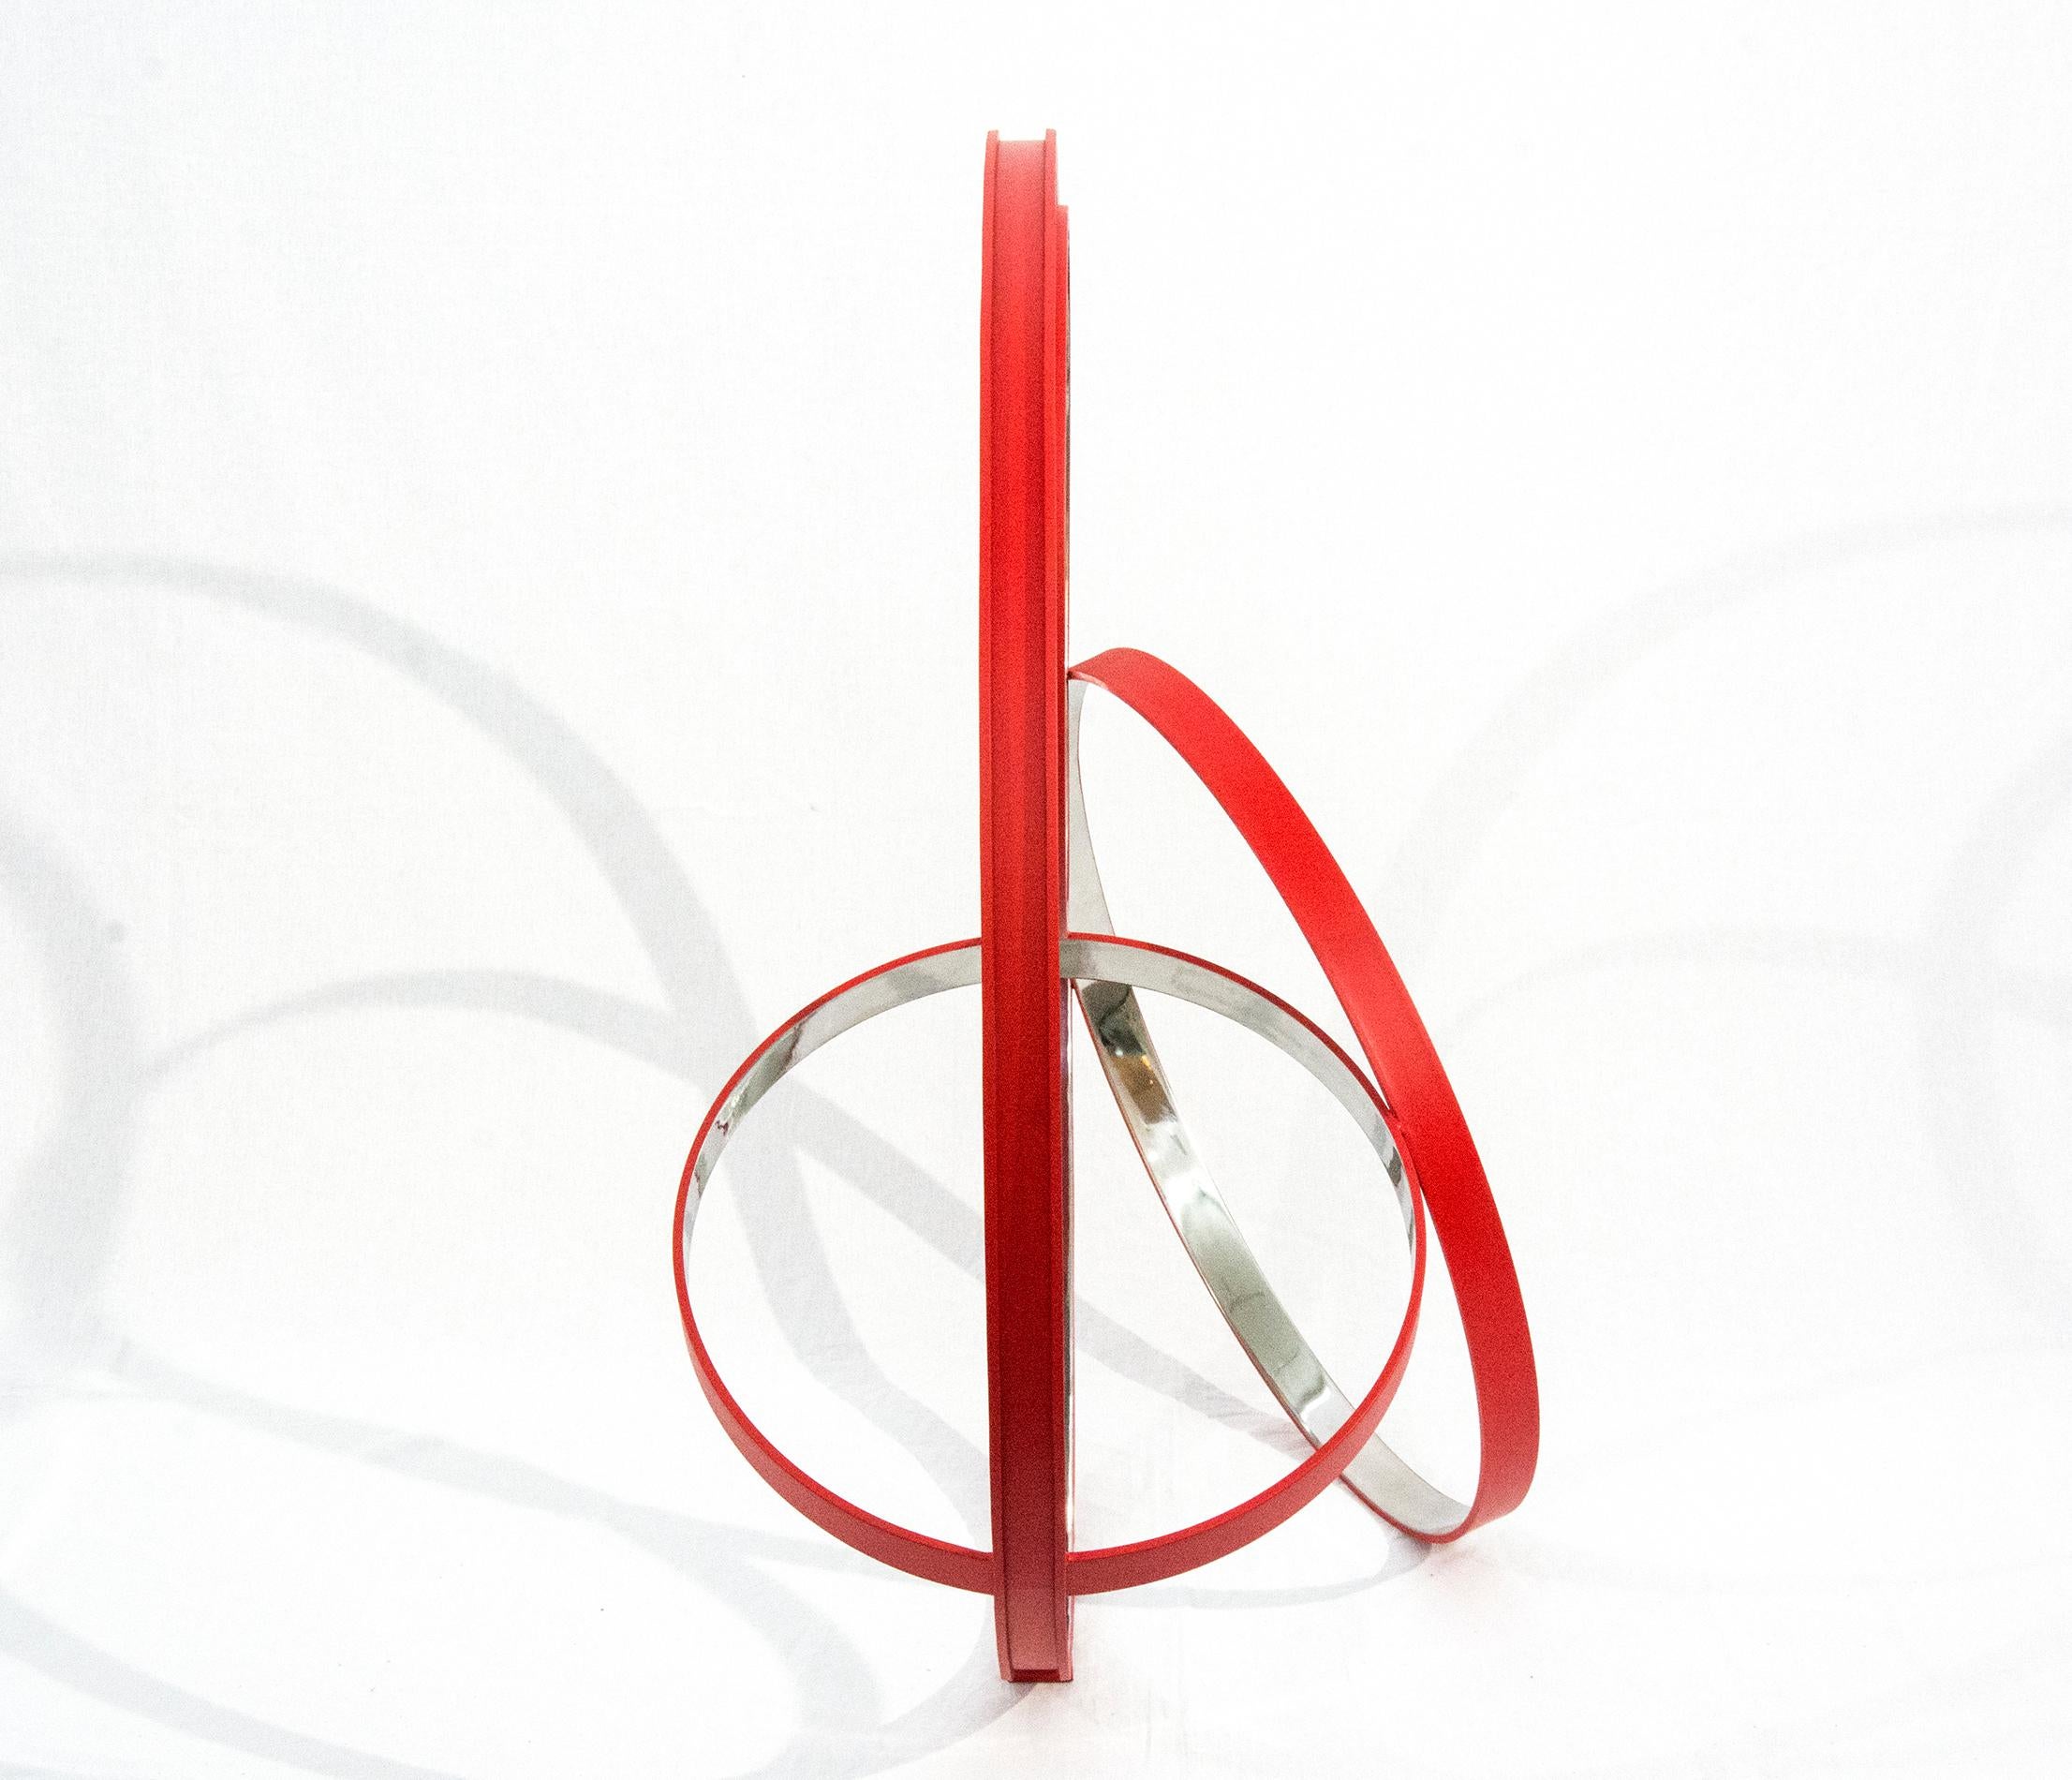 Large Red Temps Zero 2/10 - contemporary, large ring, stainless steel sculpture - Abstract Geometric Art by Philippe Pallafray